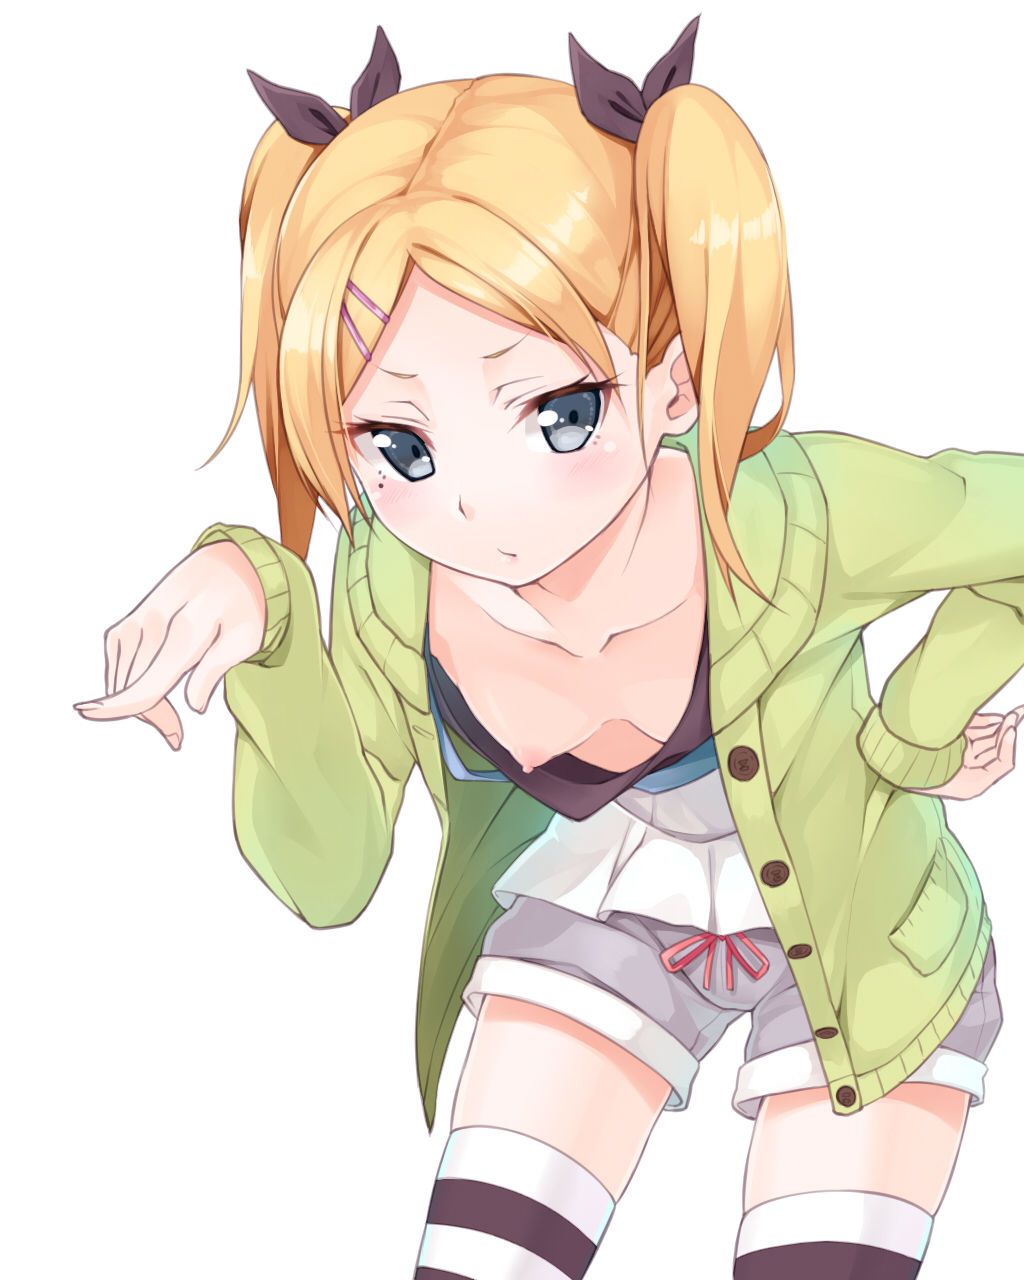 Erotic image that can be pulled out just by imagining Erika Yano's masturbation figure [SHIROBAKO] 12